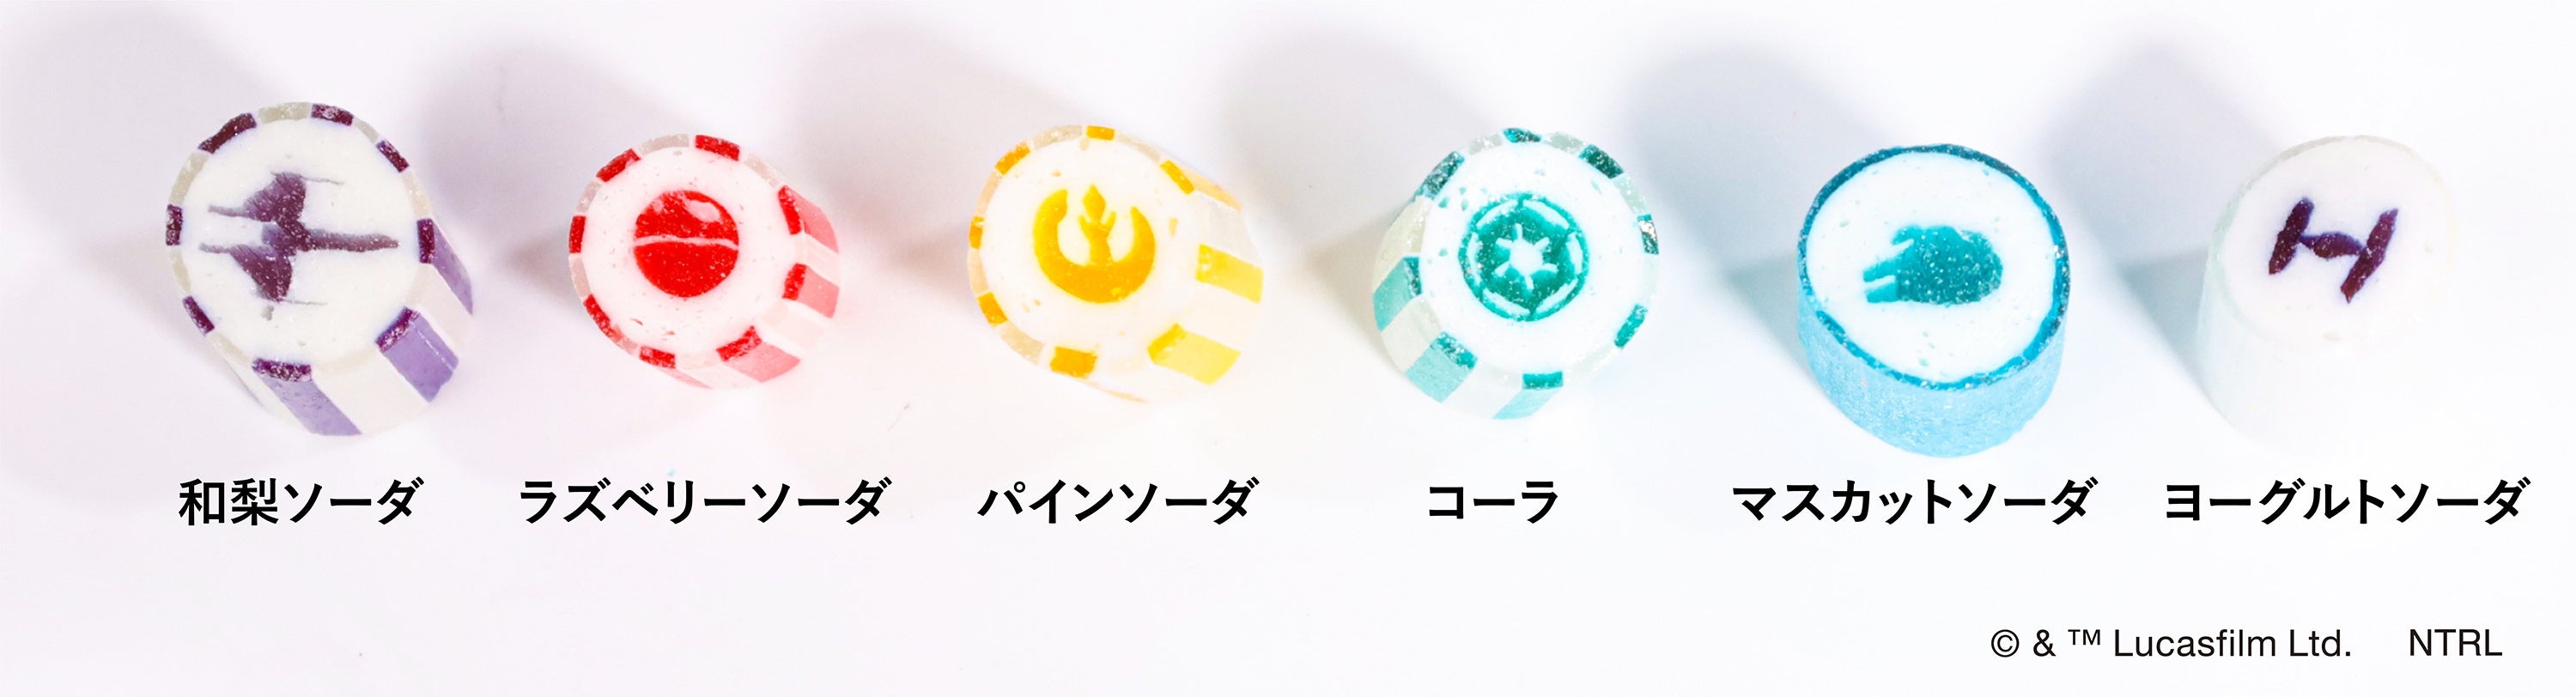 uSTAR WARS G.W. COLLECTION -PARCO 55th CAMPAIGN-vXyVACeppuuXɂ426()蔭JnB